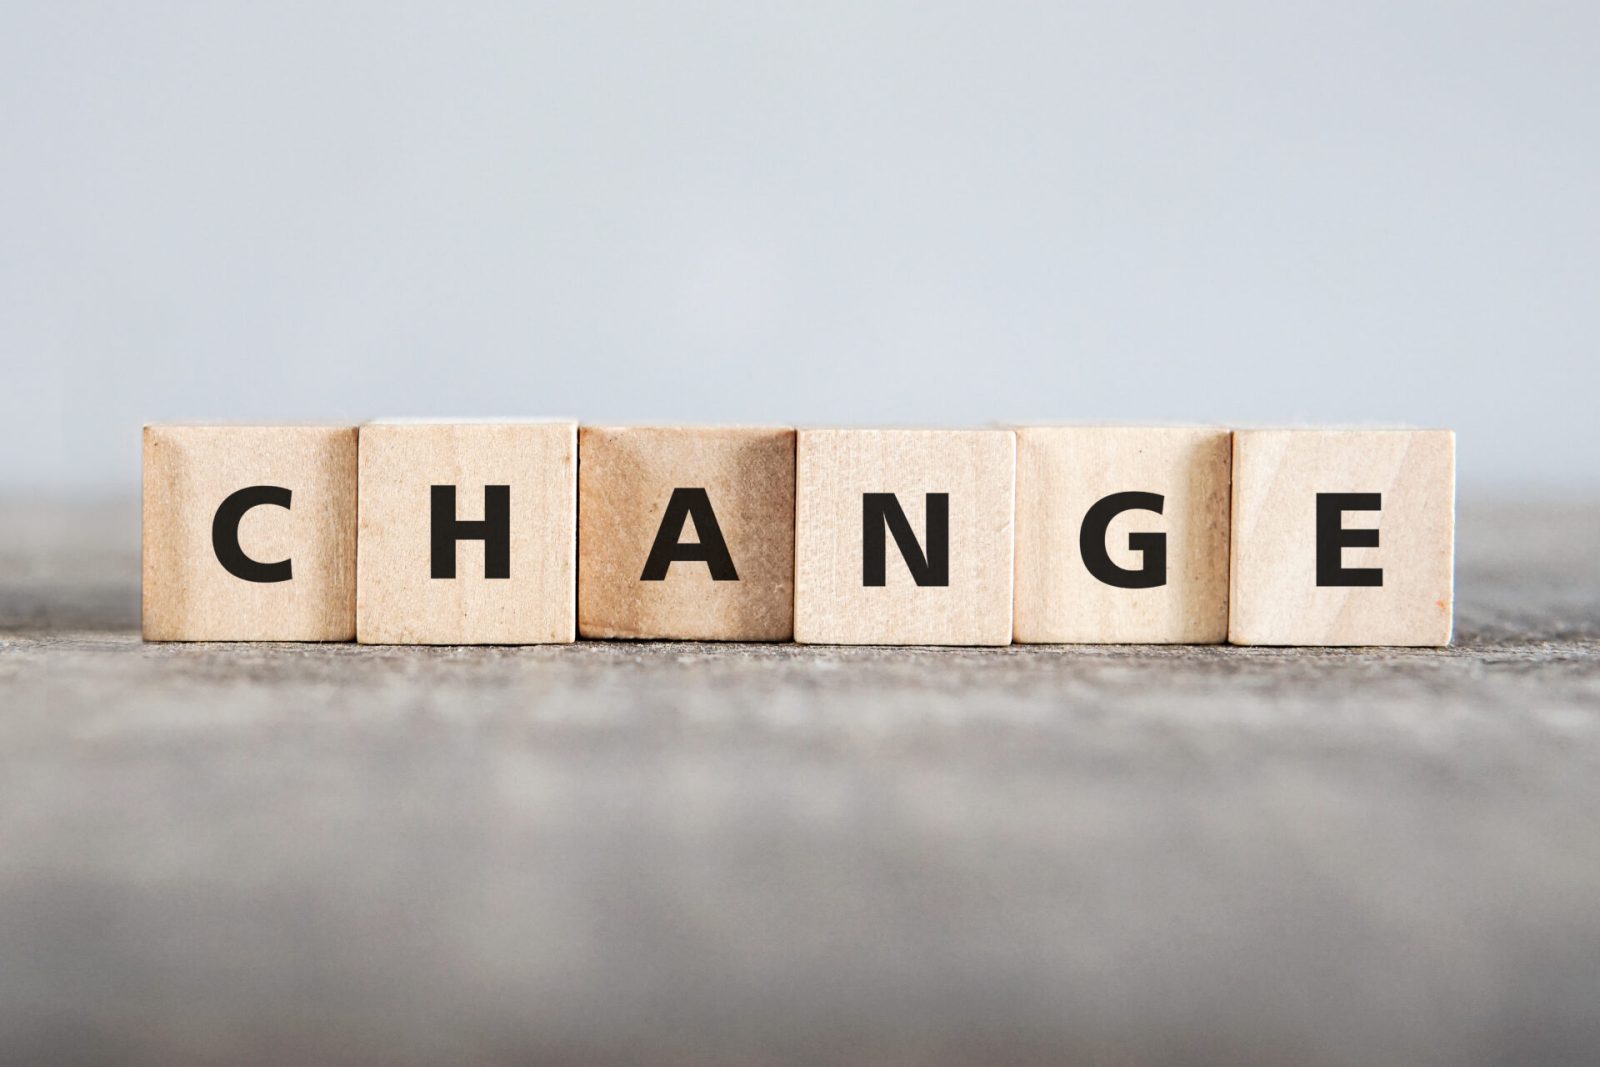 How to support change management?